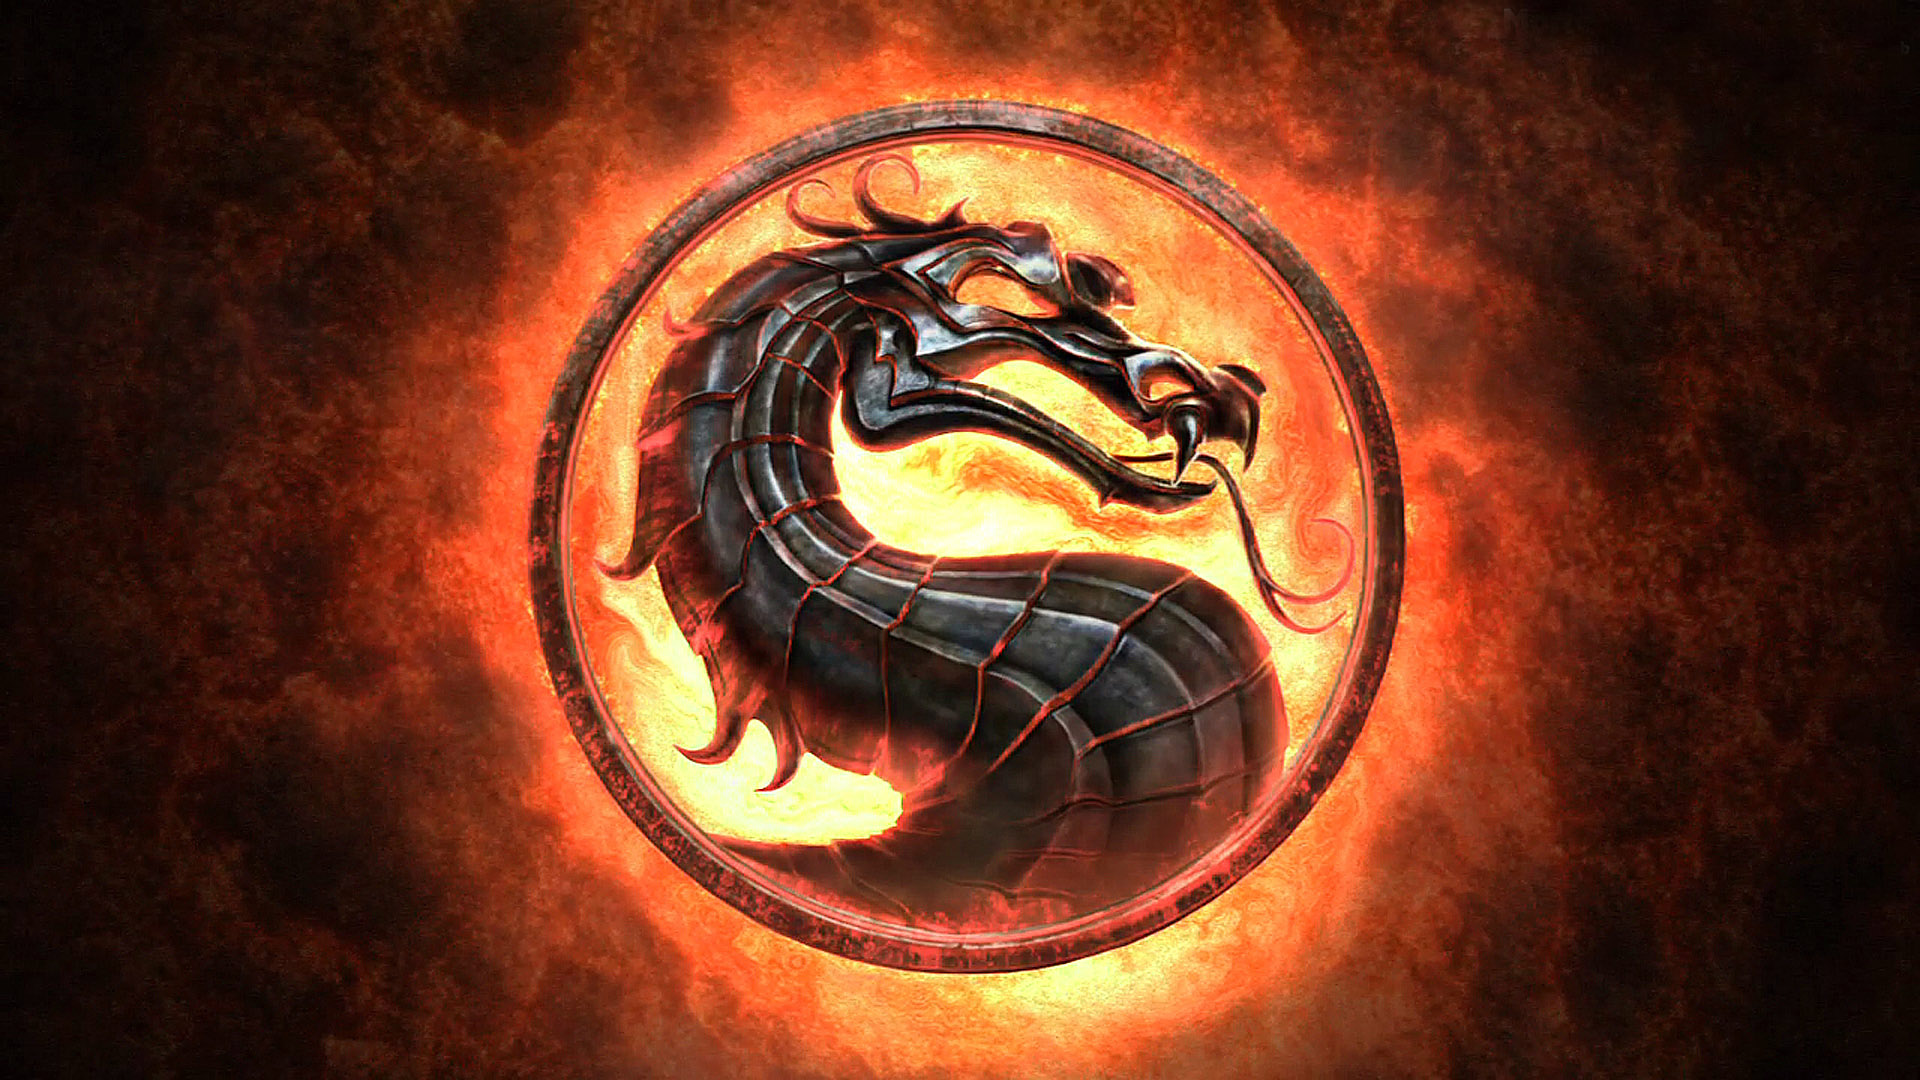 Mortal Kombat 12 announced without any